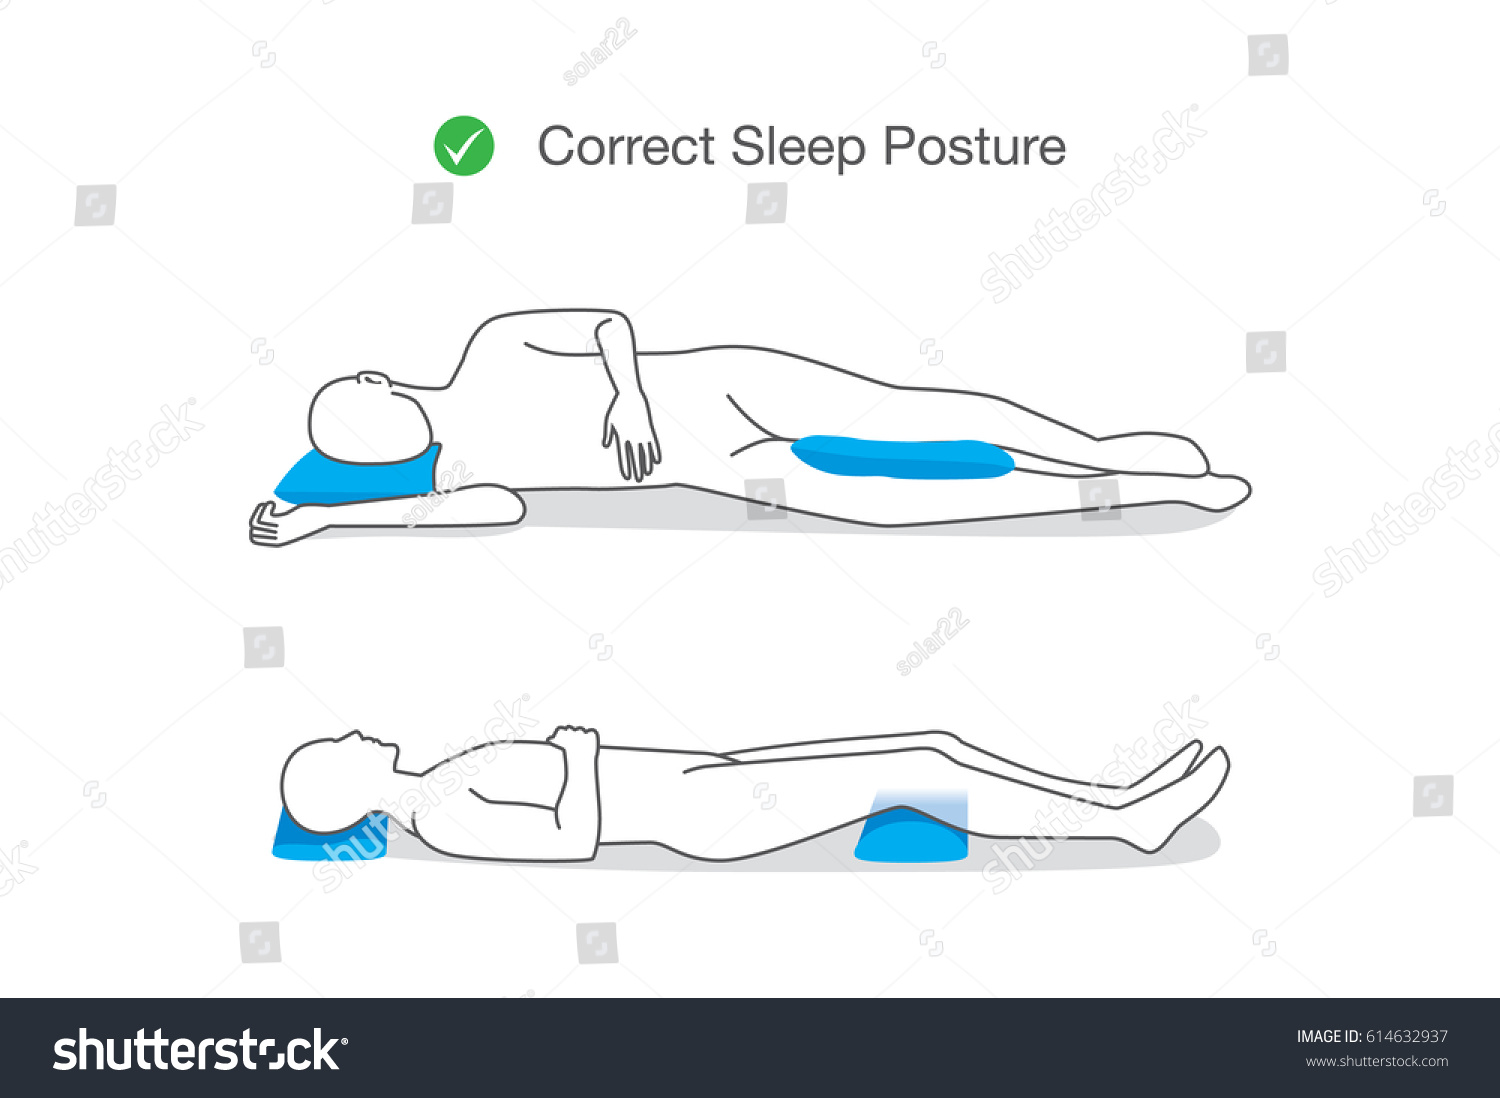 SVG of Correct posture while sleeping for maintaining your body. Illustration about healthy lifestyle. svg